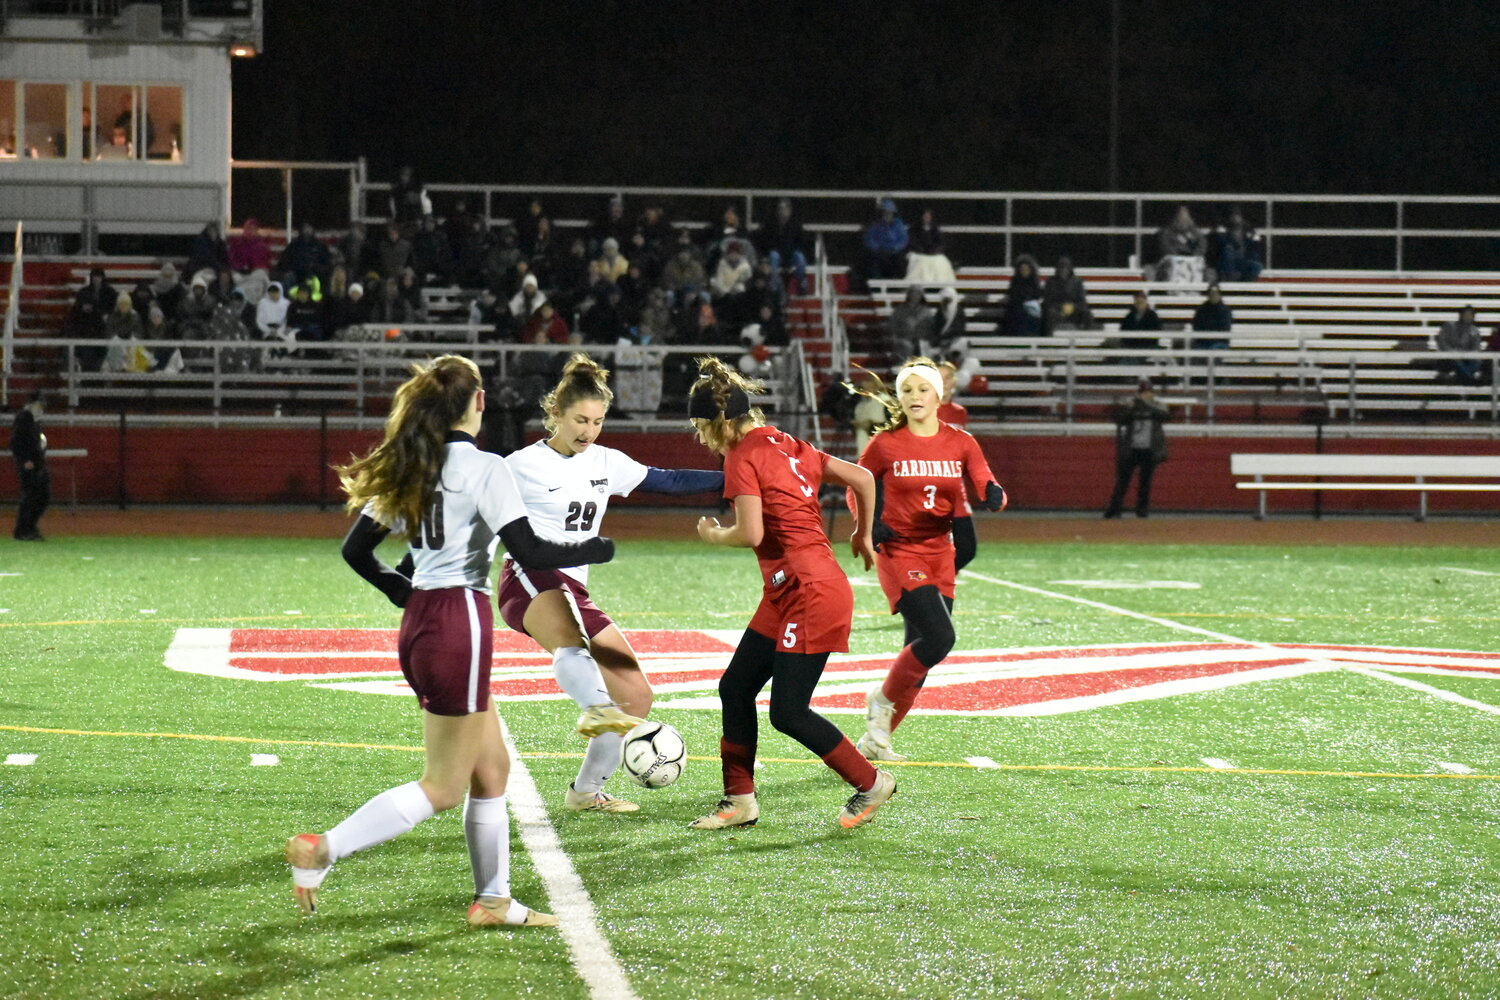 The Cardinals put extra pressure on Rebecca Gashinsky throughout the game, which limited Livingston Manor’s ability to effectively advance the ball through the middle of the field.